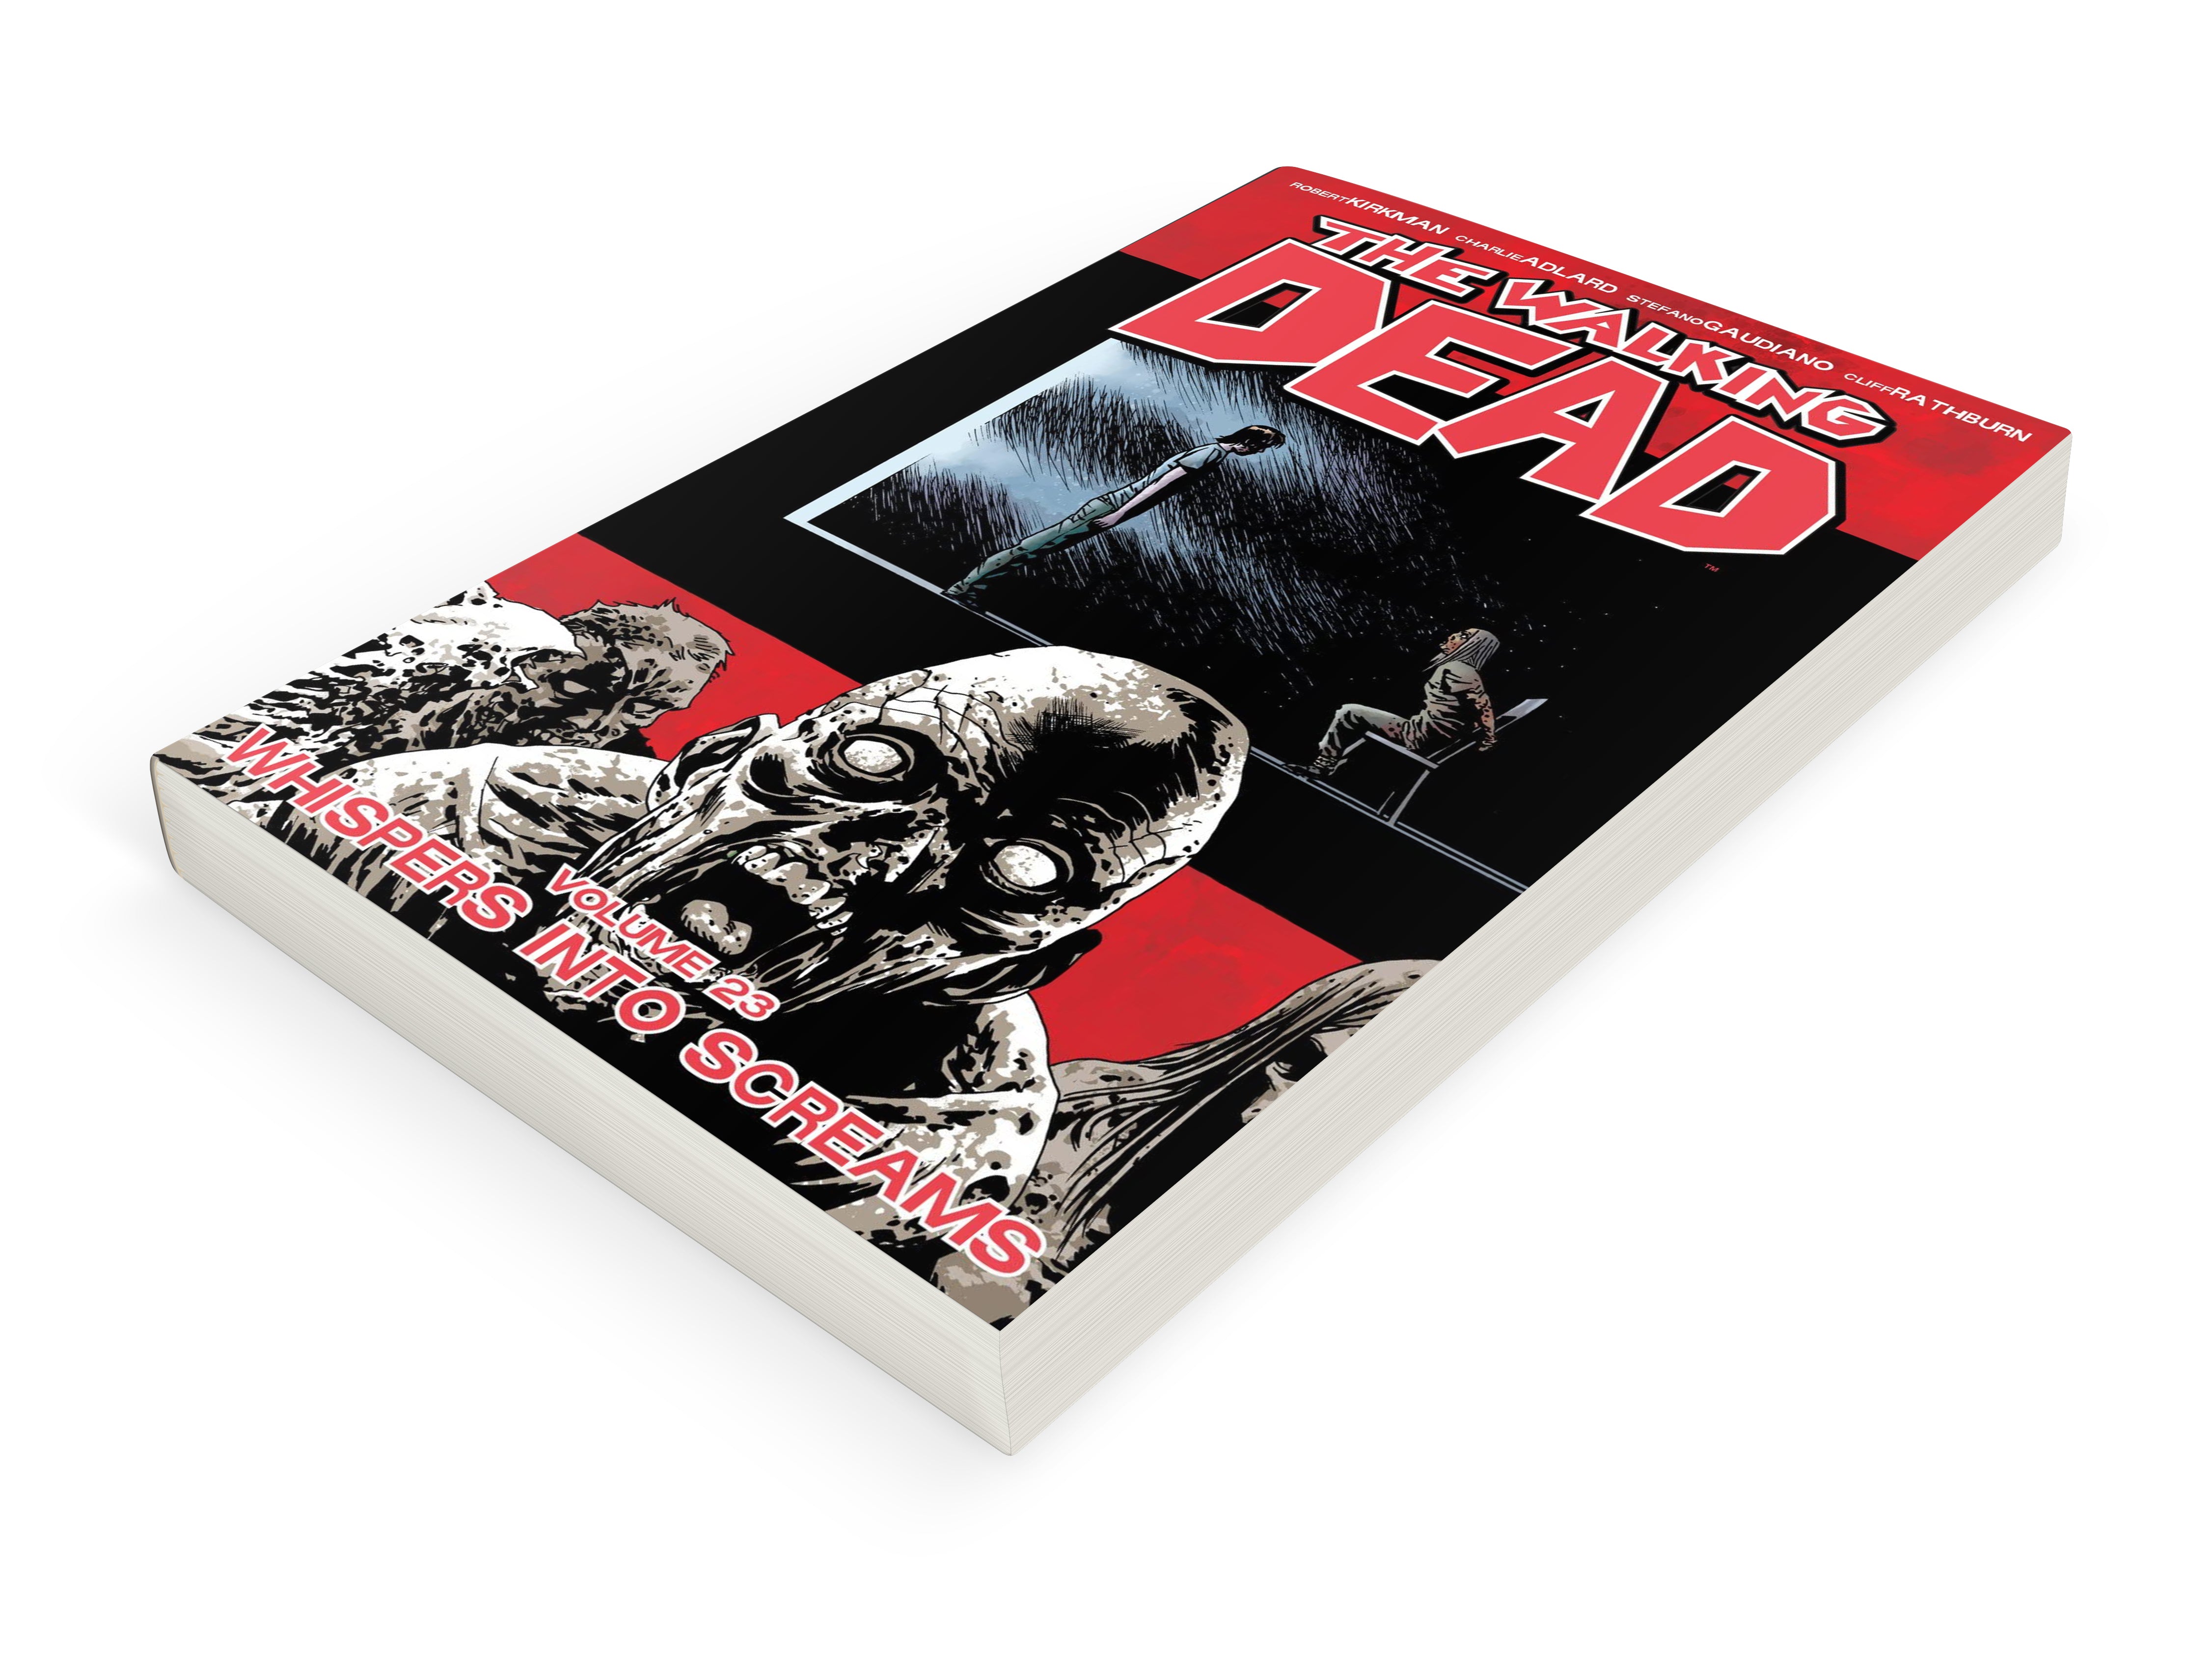 THE WALKING DEAD TPB 23: WHISPERS TO SCREAMS